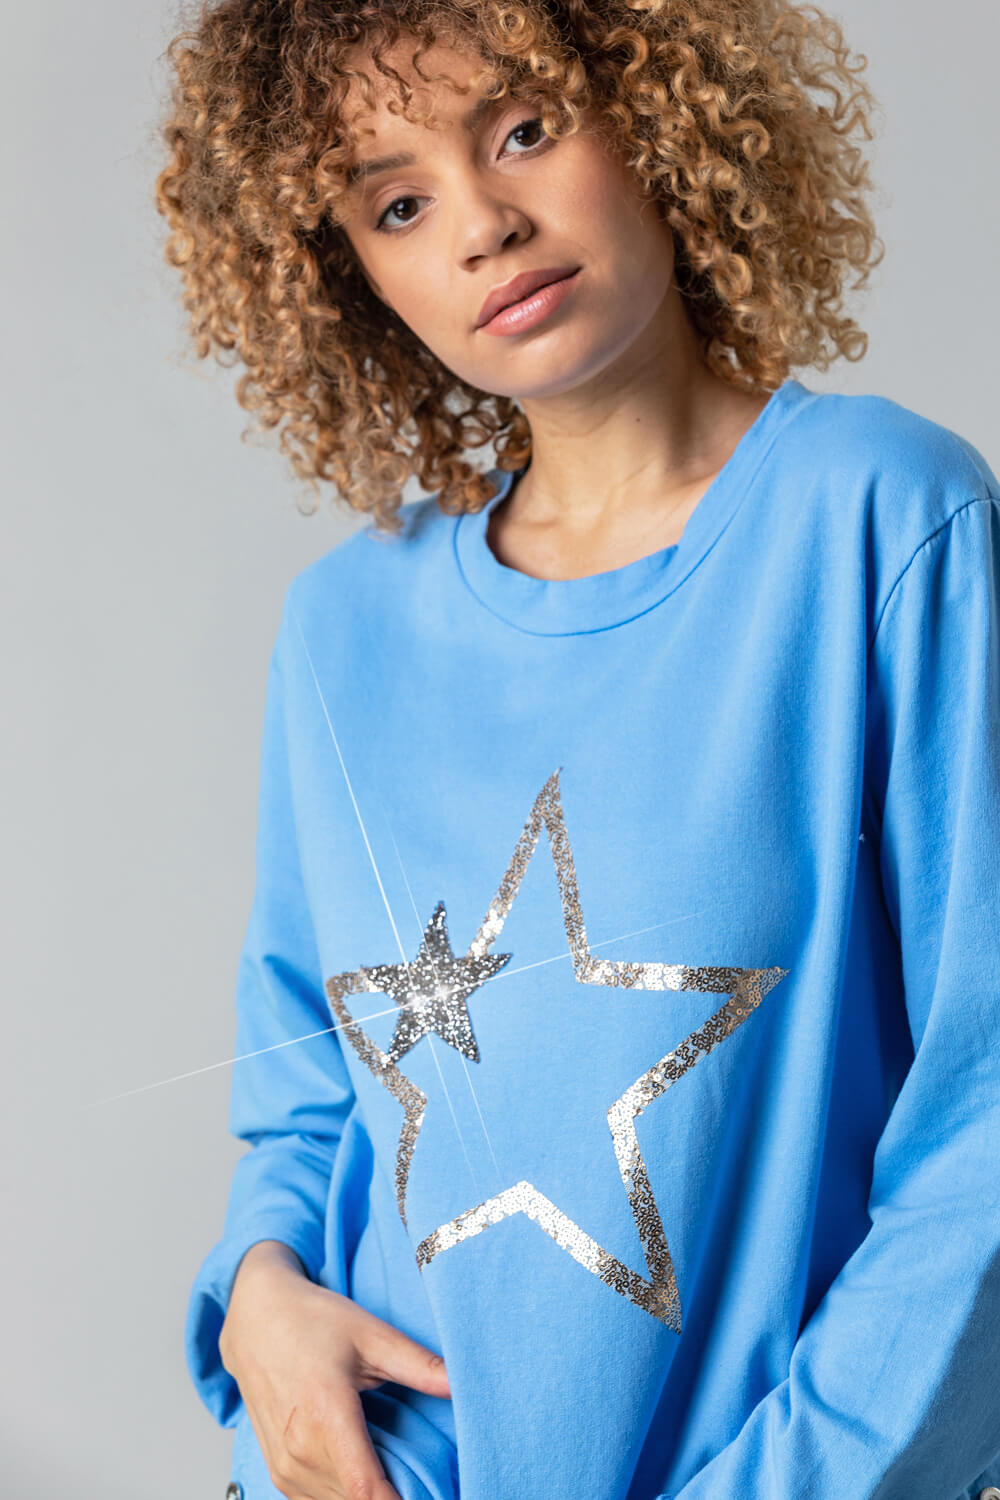 Denim Blue Star Print Button Side Lounge Top, Image 4 of 5